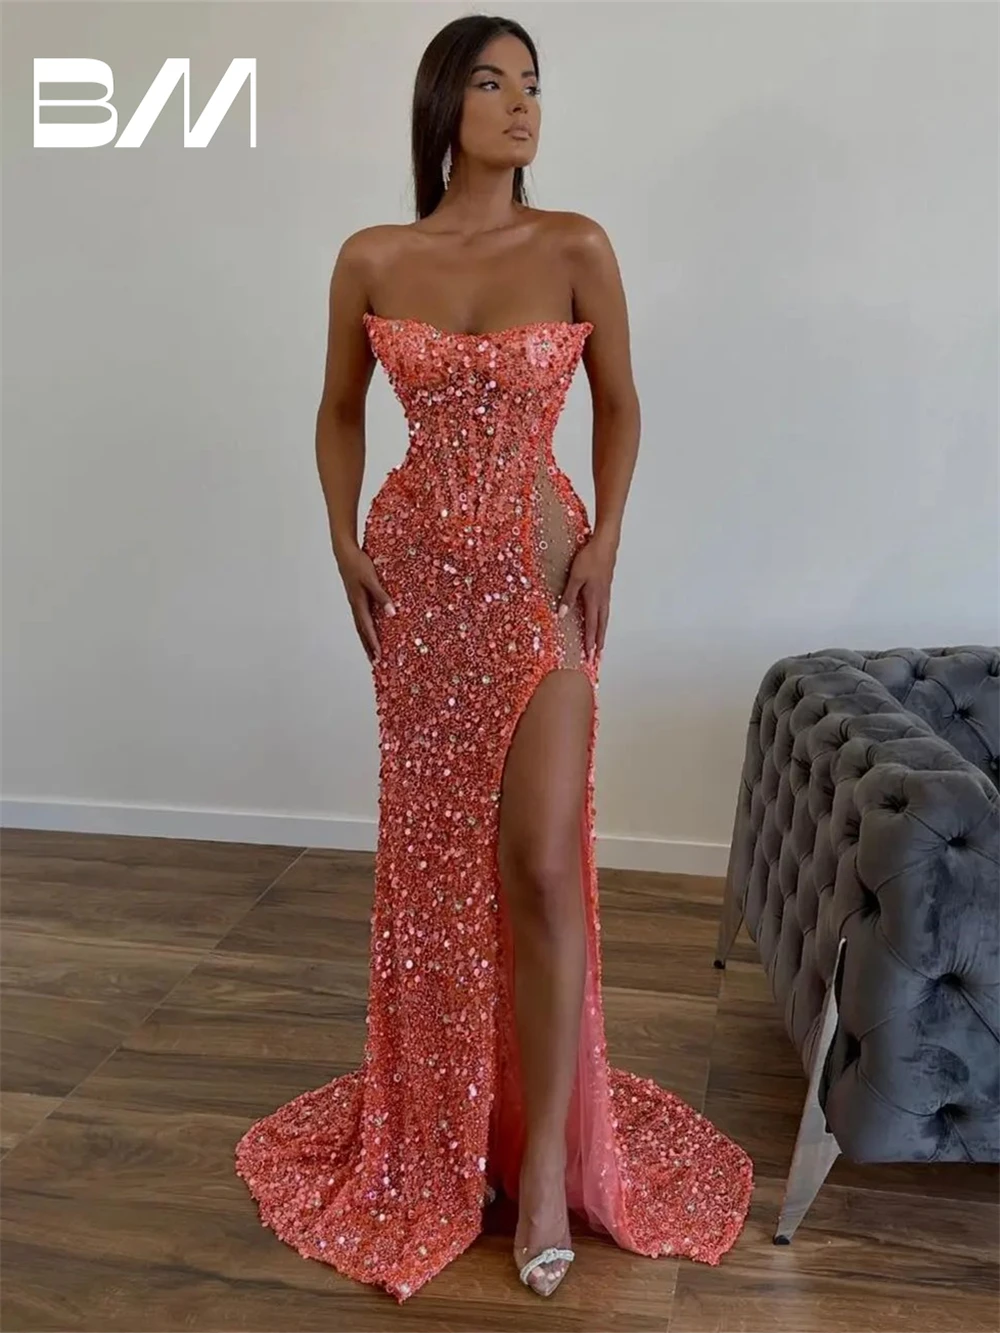 

Watermelon Strapless Sequined Prom Dress Side Thigh Slit Sexy Corset Pearls Long Evening Dresses robe de soriee Party Gown